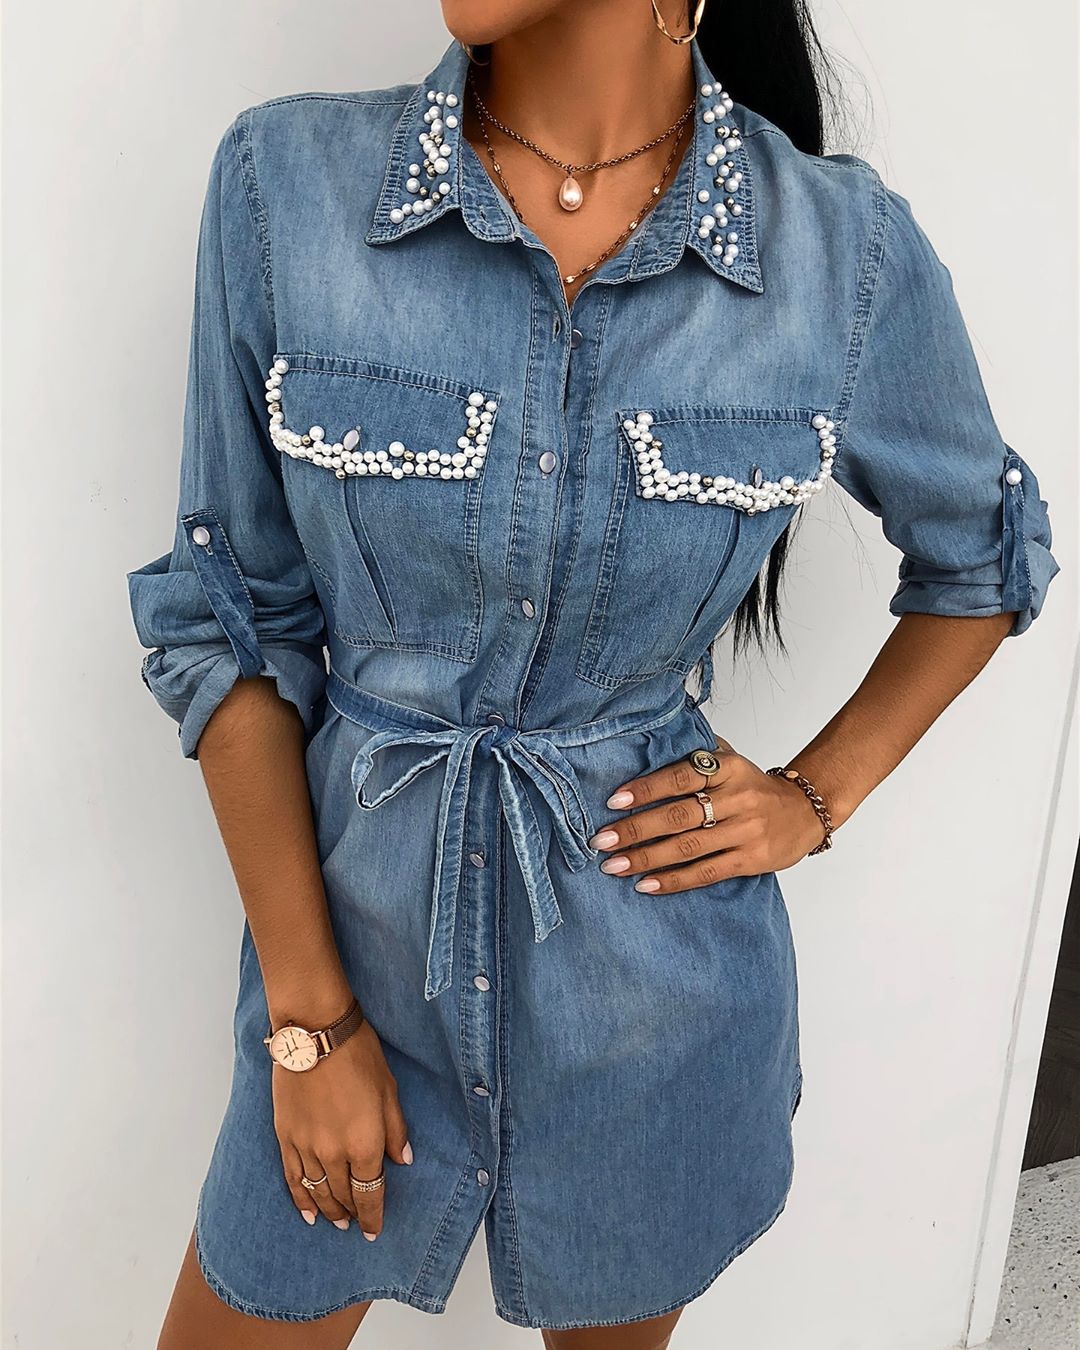 Chic Me - All about the denim.⁠
🔍"MF0011"⁠
Shop: ChicMe.com⁠
⁠
#chicmeofficial #fashion #lovecurves #ootd #style #chic #fashionmoment #love #TagsForLikes #like4like #look #instalike #bestoftheday